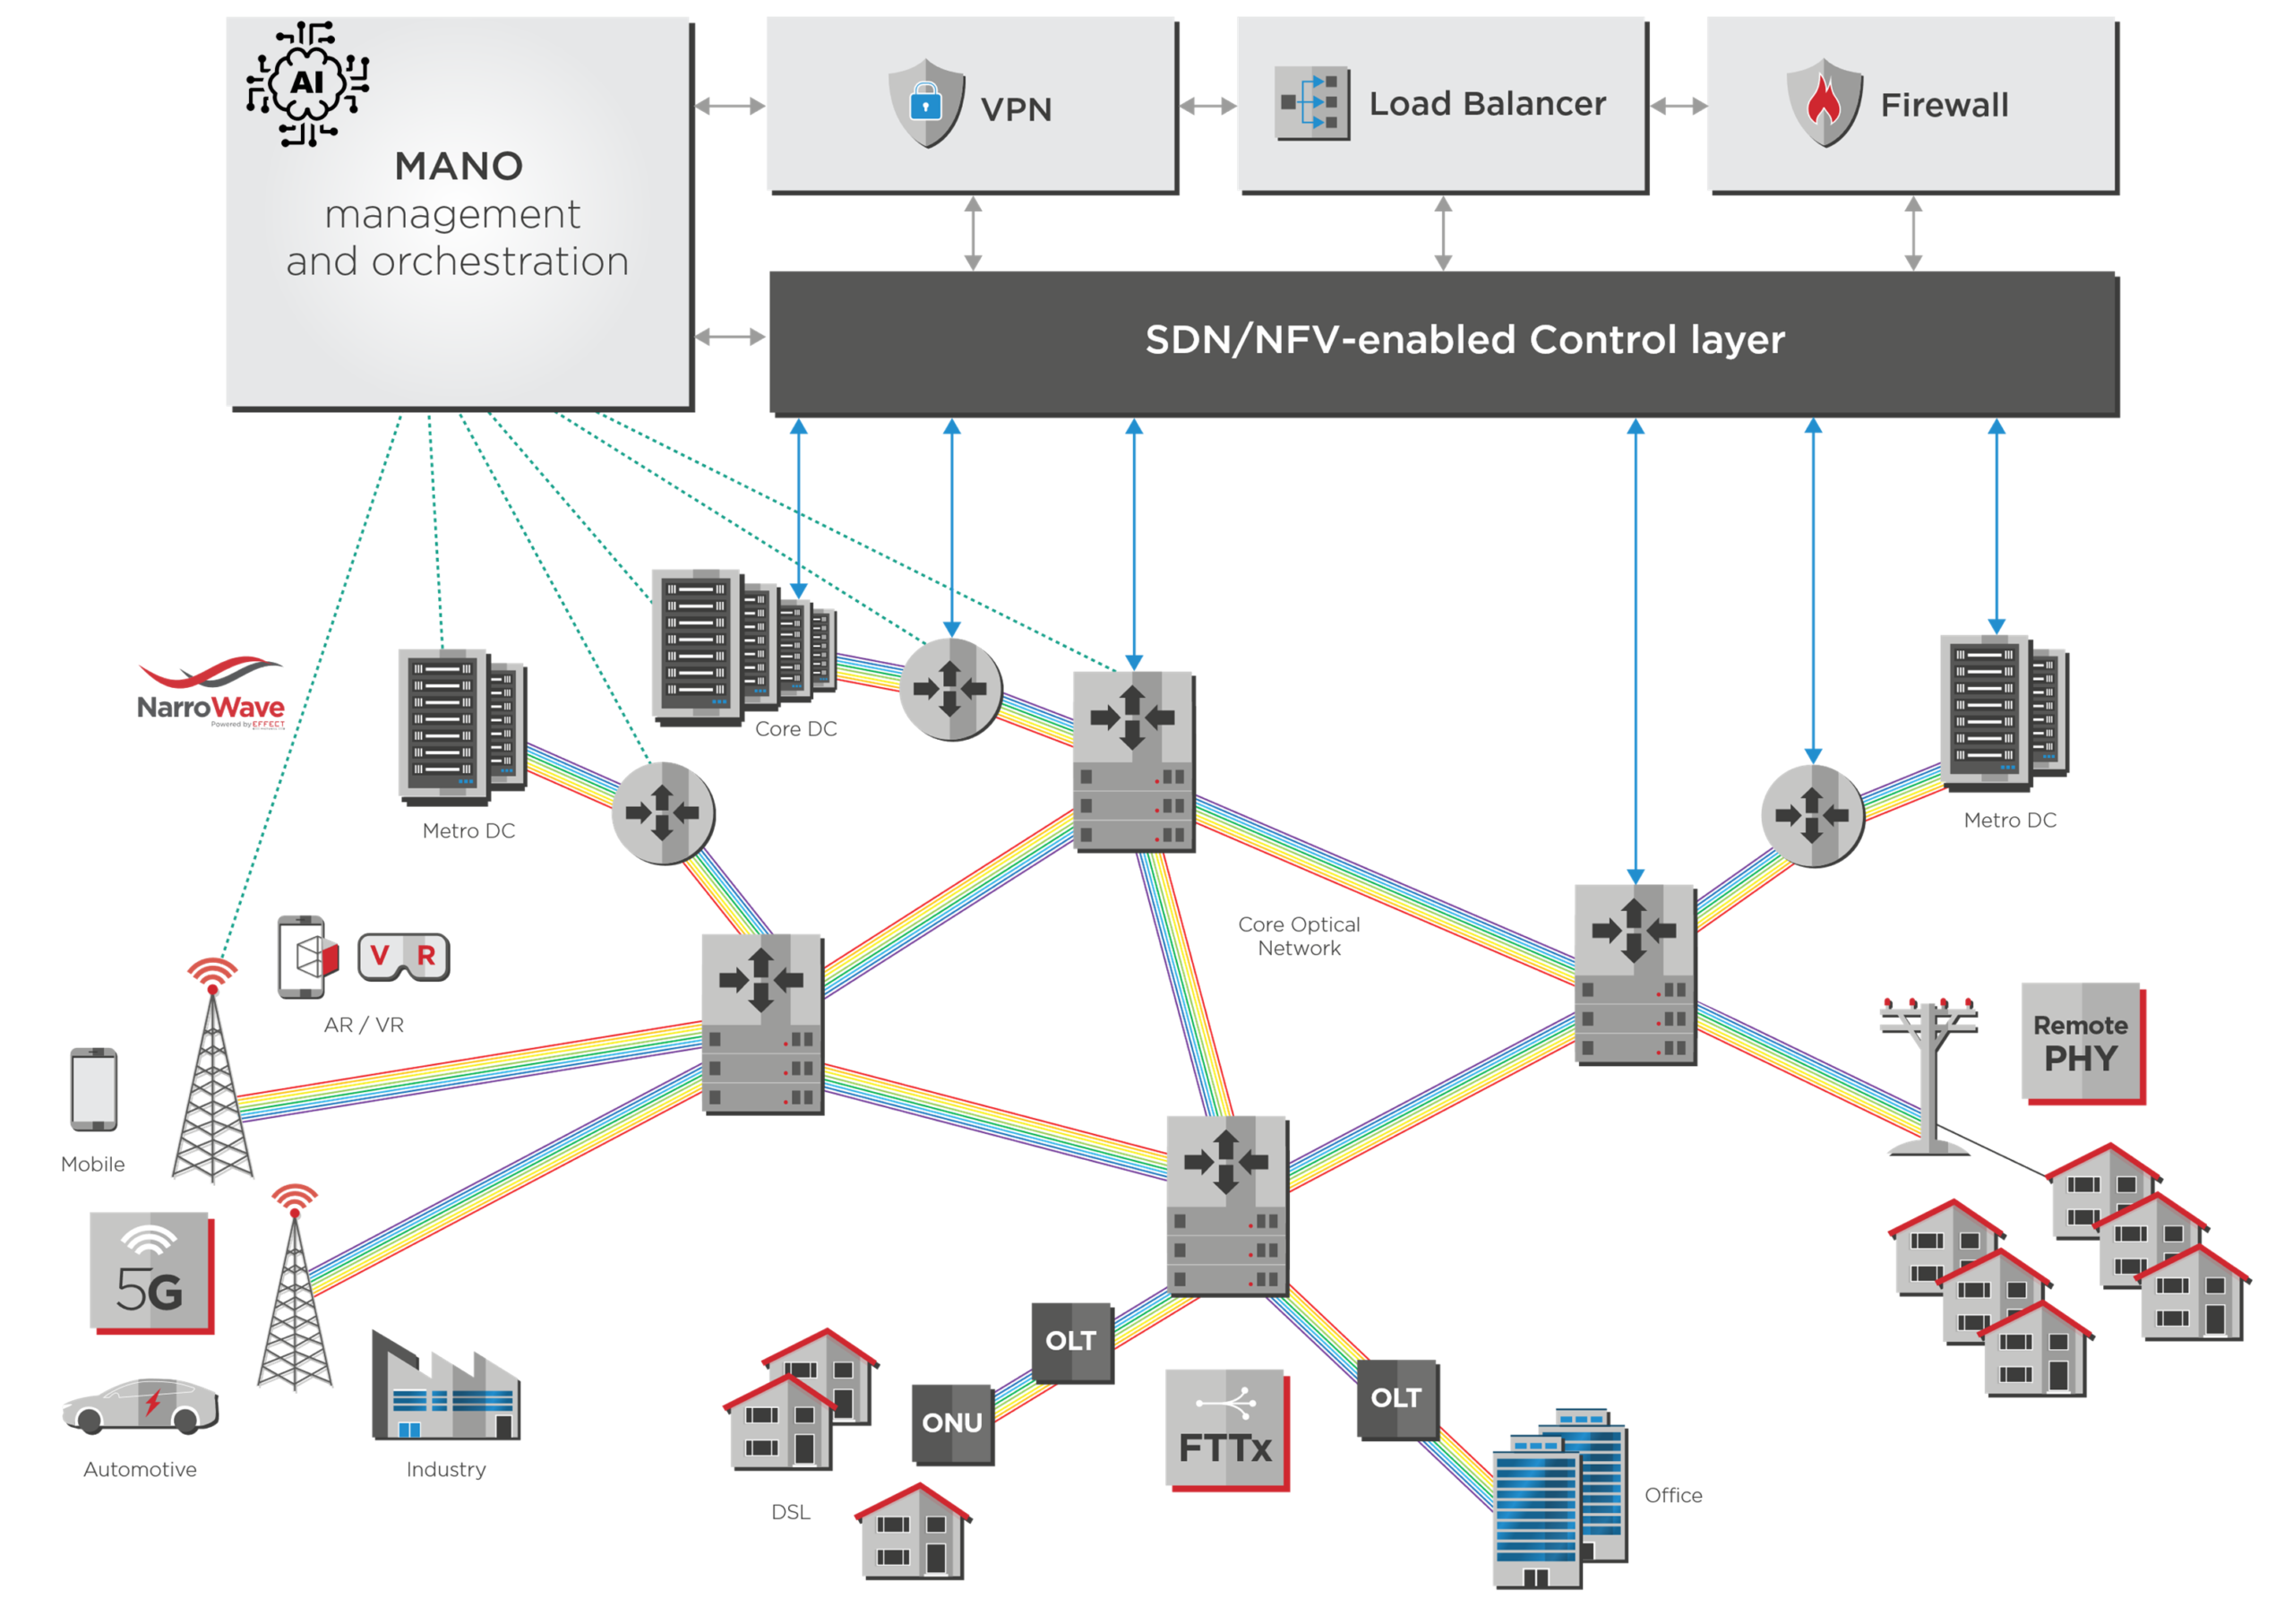 Figure 1: Example of a carrier network with different applications (mobile, home, office) automated via NFV control and AI management.